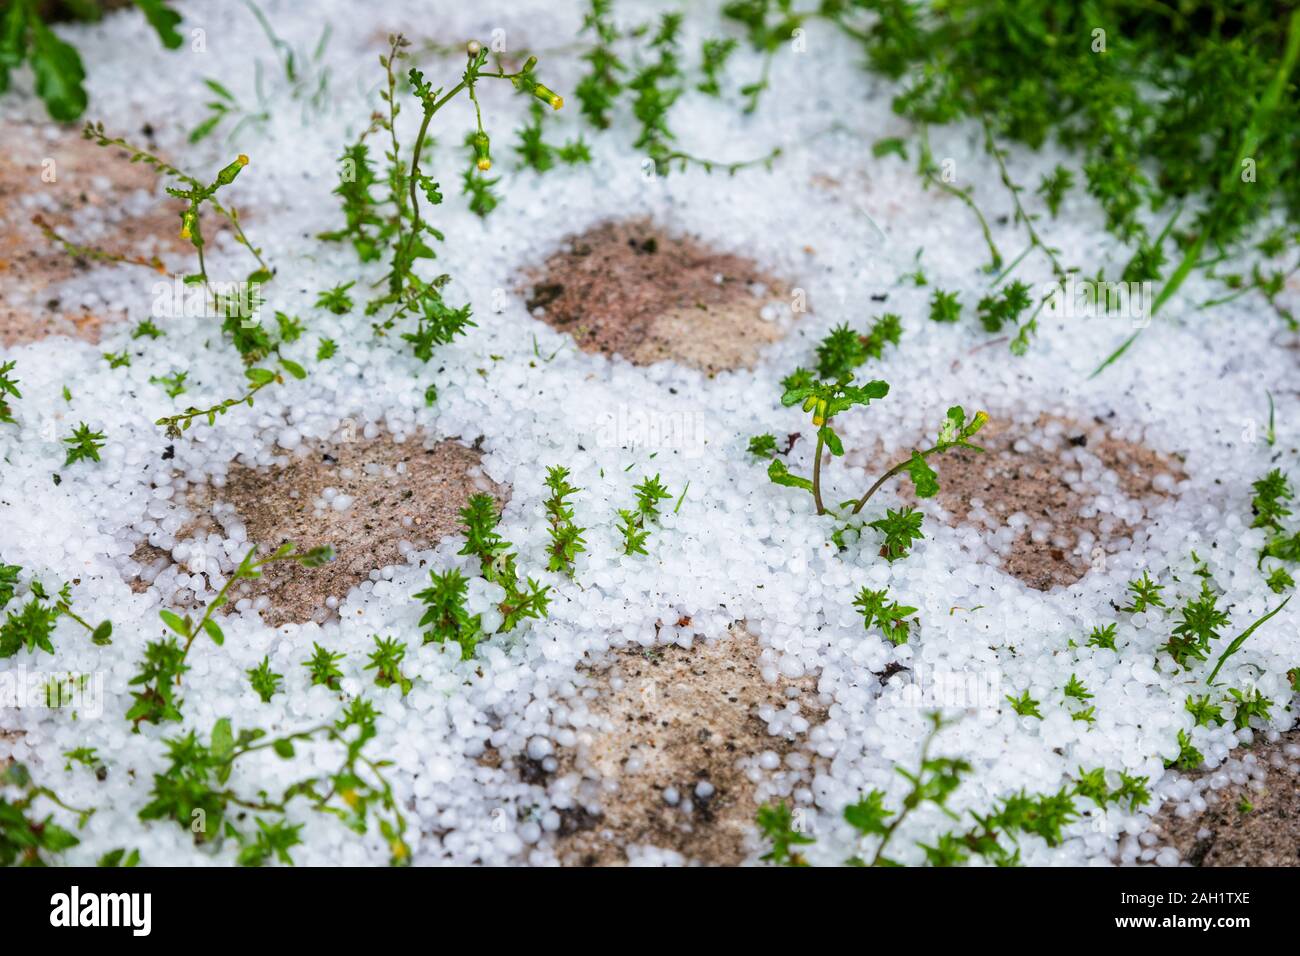 Accumulation of ice pellets or graupel on cobblestone pavement at spring natural disaster concept Stock Photo